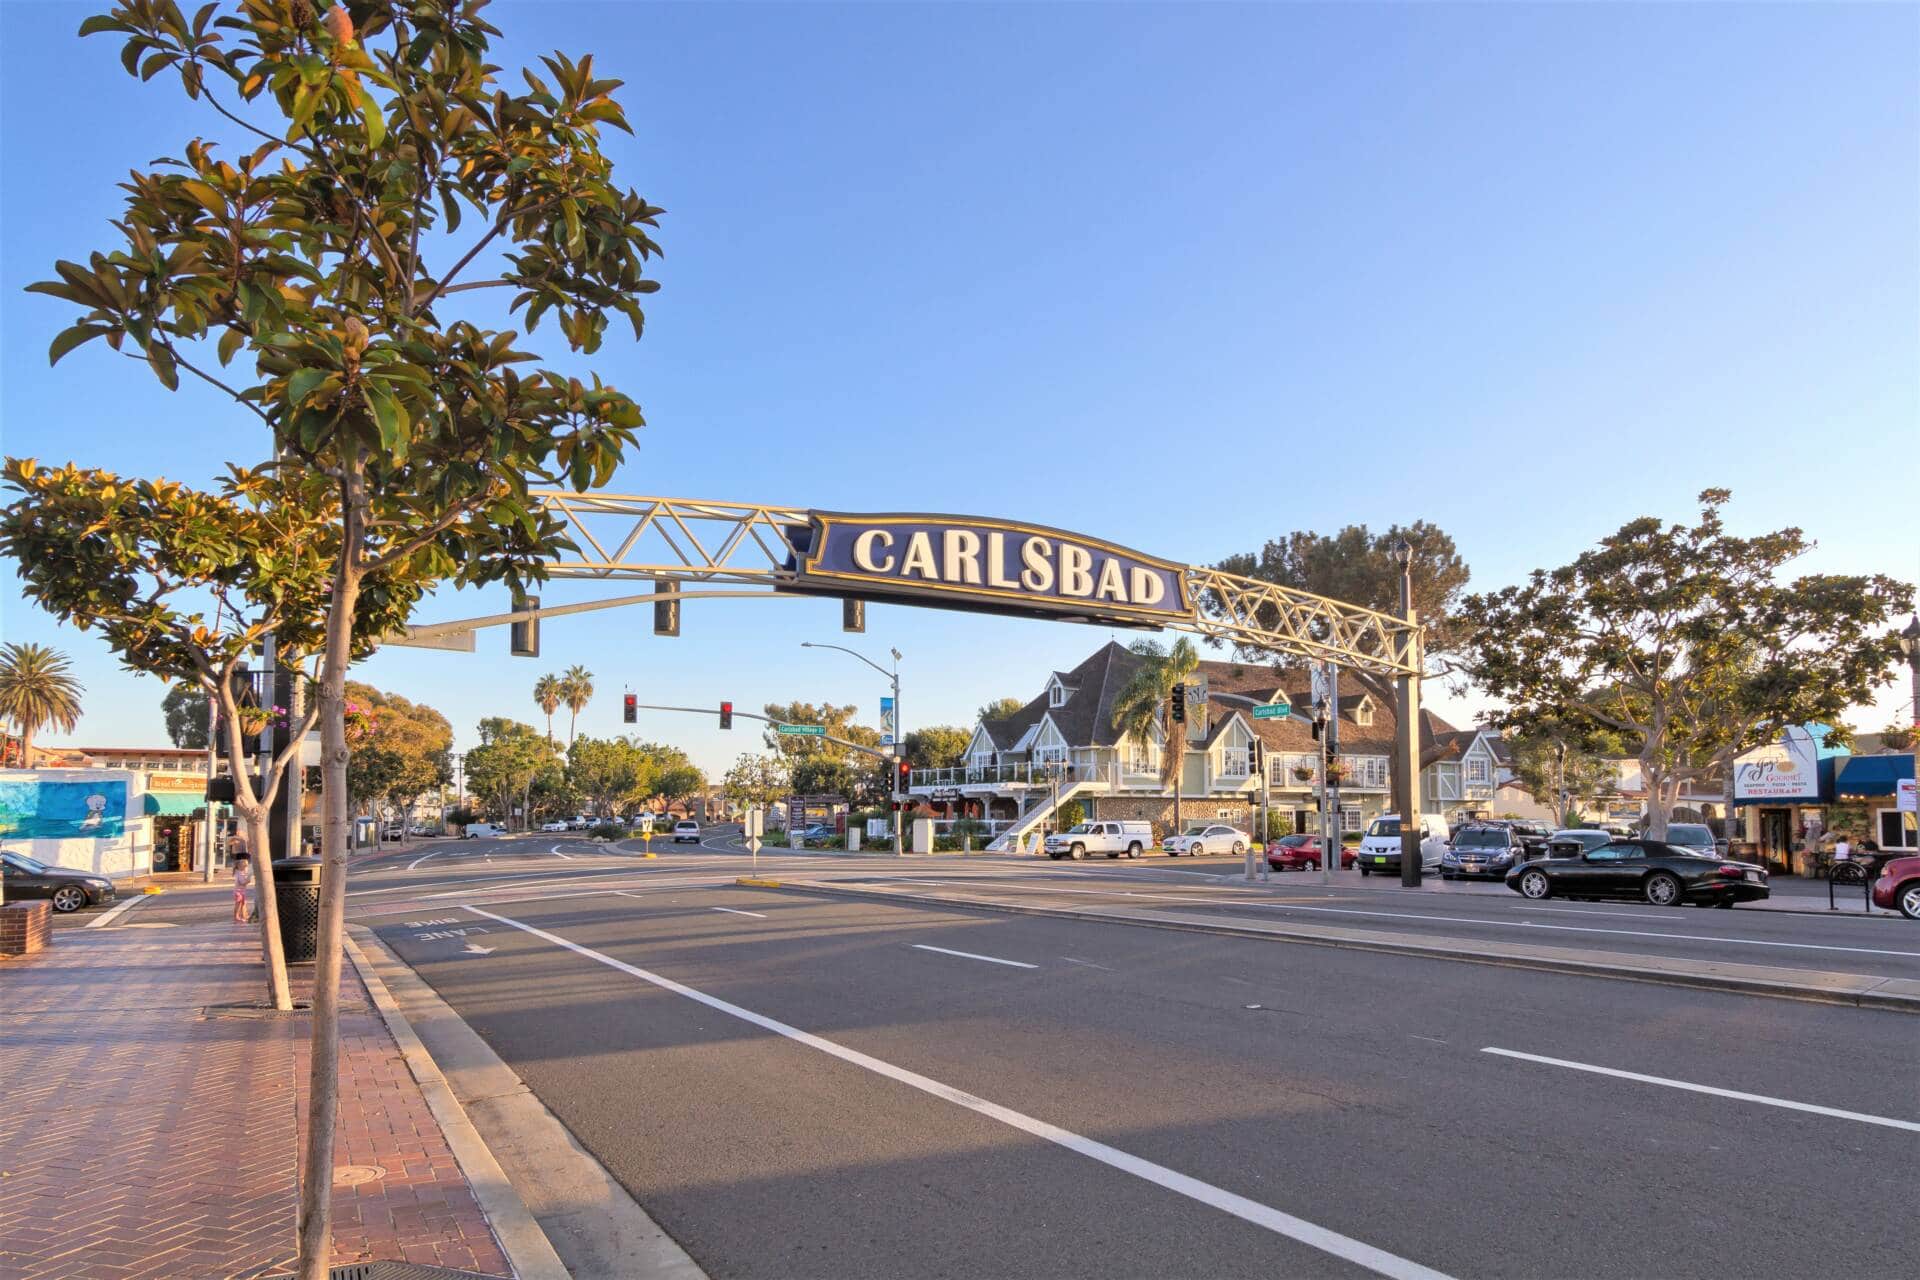 10 Fun Family-Friendly Activities in Carlsbad